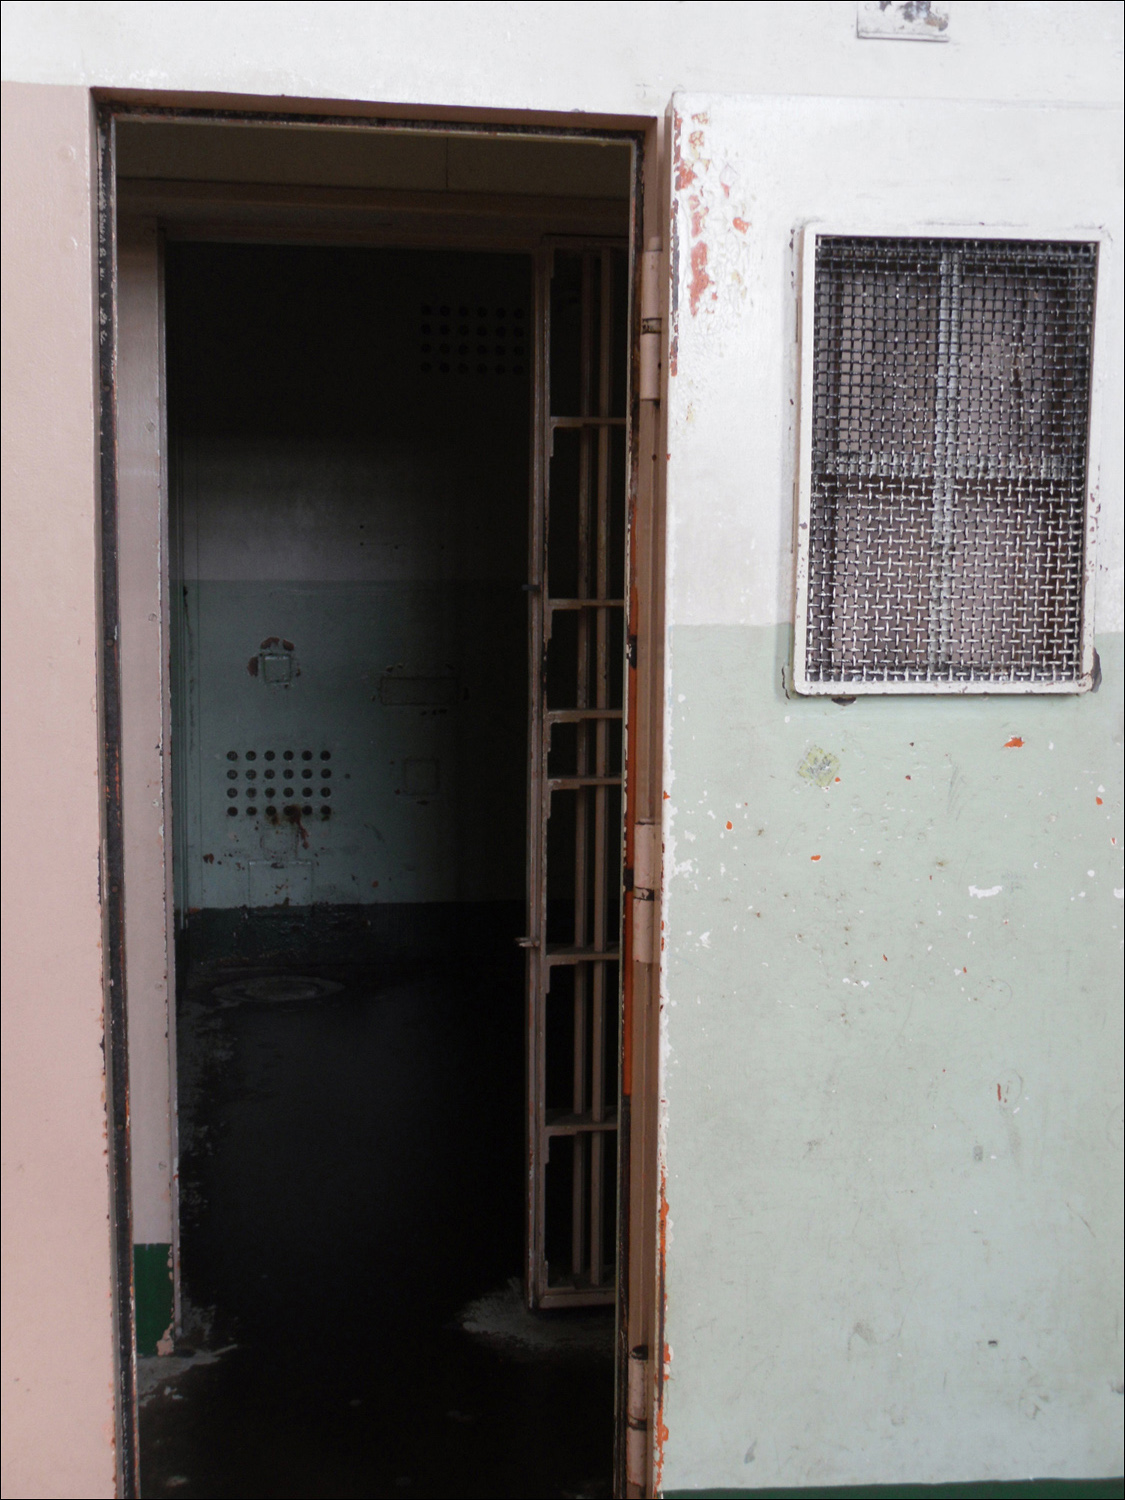 Solitary confinement cell in D block